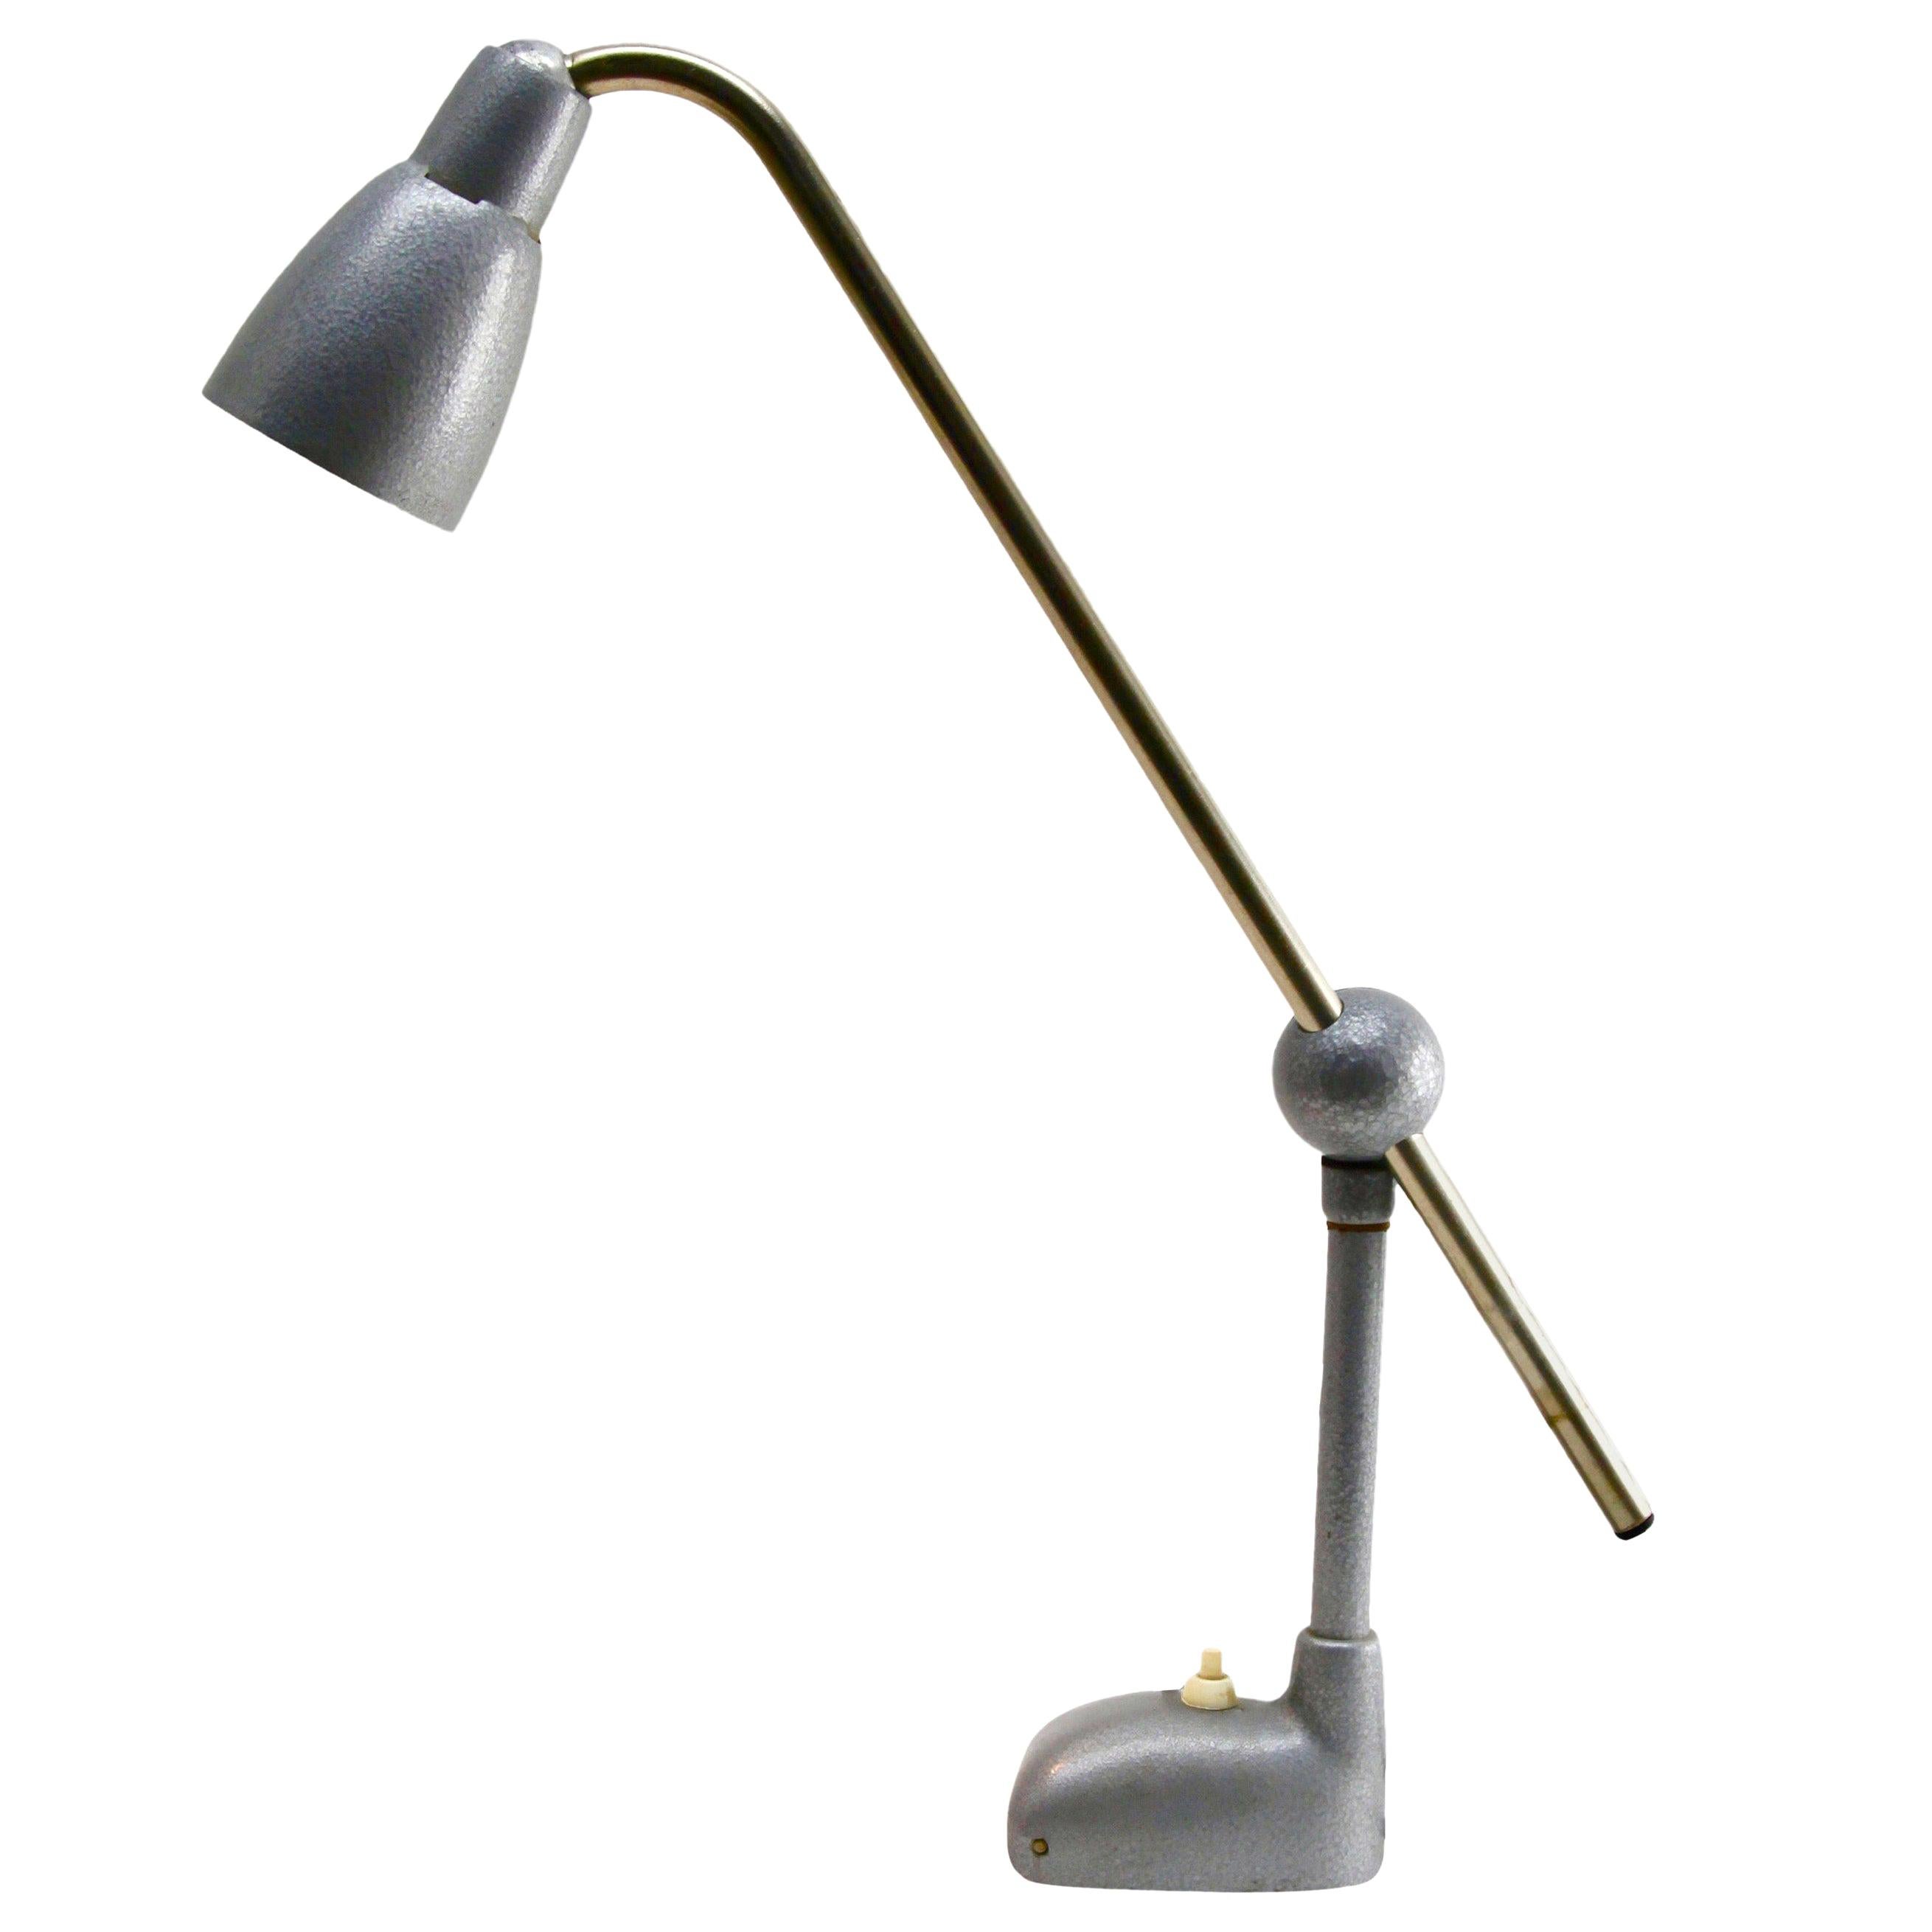 Industrial Work-Light 'Desk Lamp' in Silver-Grey with Concealed Screw-Down Base